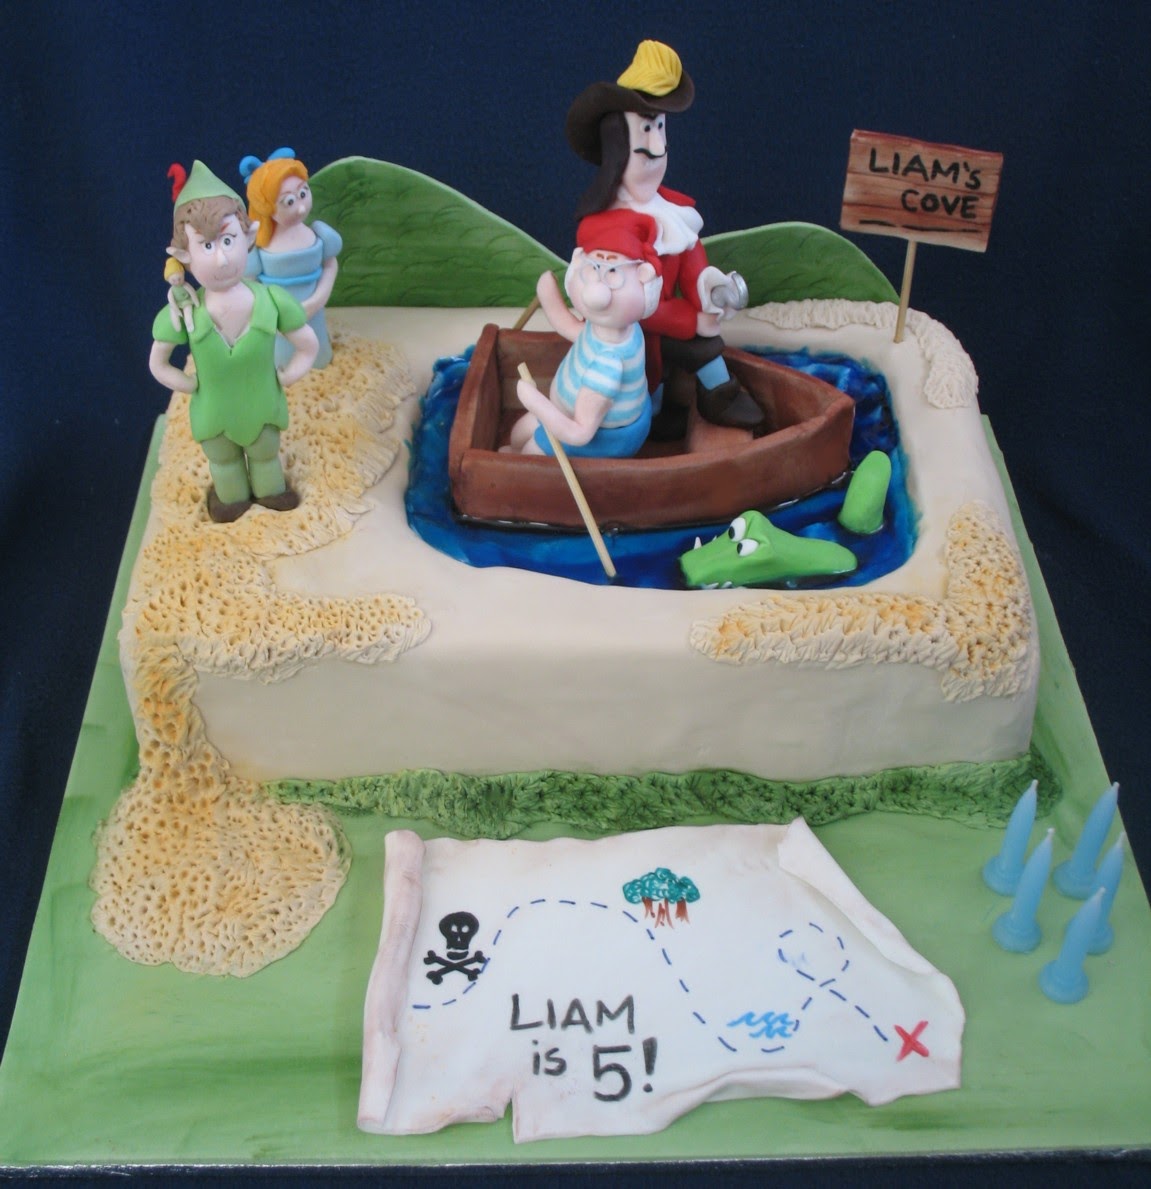 Blissfully Sweet: A Peter Pan cake for a Devoted Fan